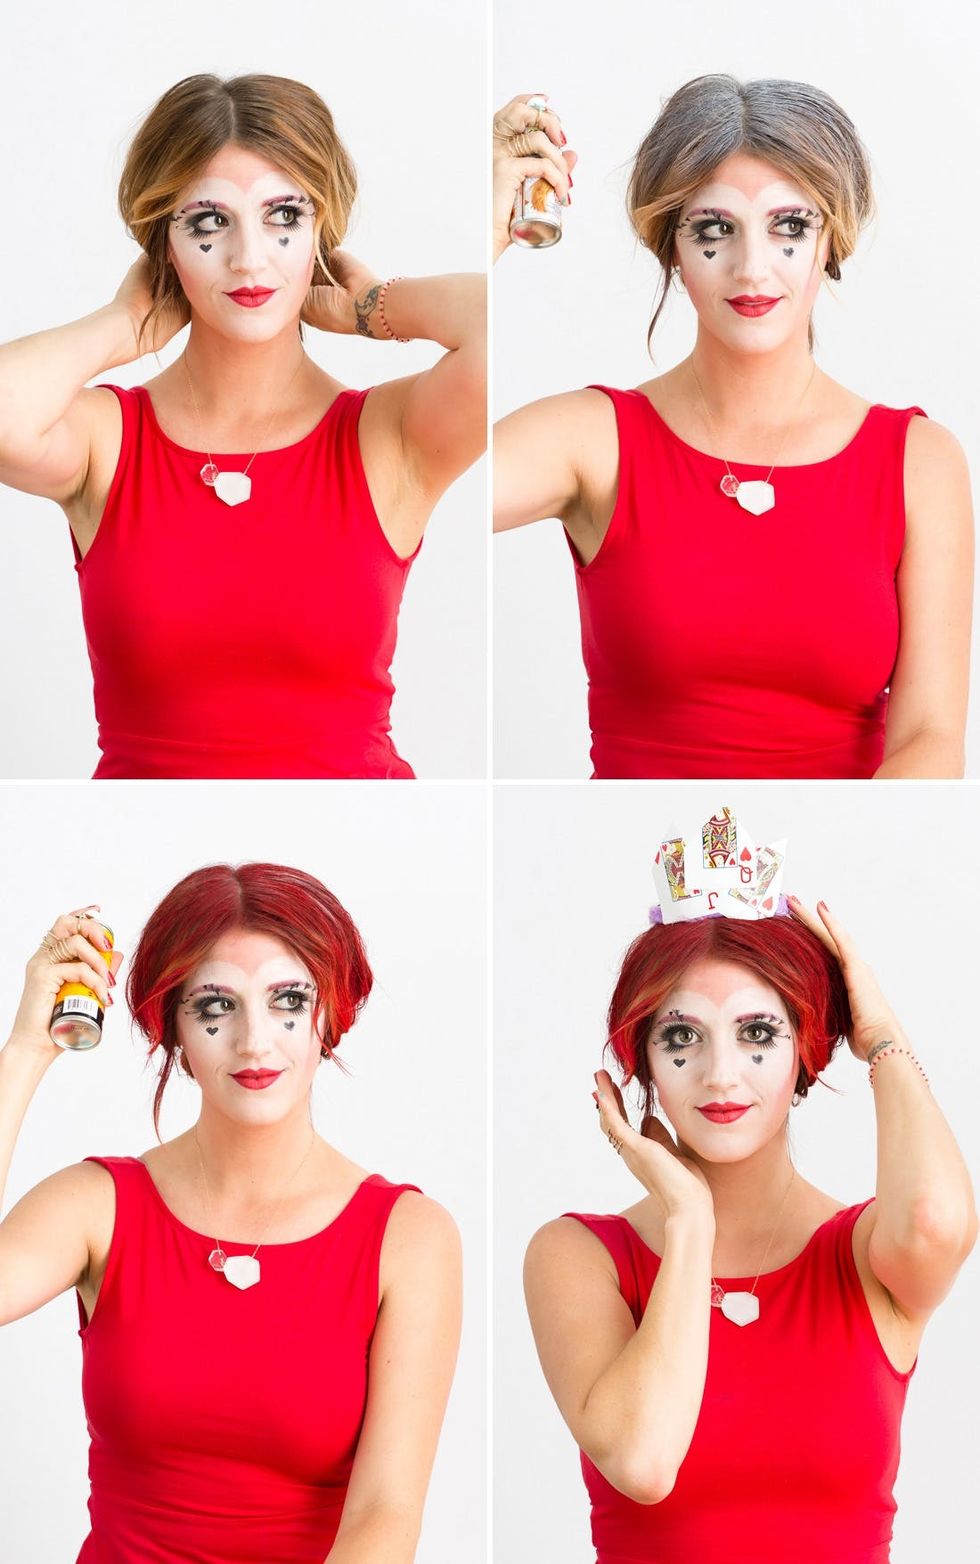 women in red dress with Queen of Hearts makeup spraying hair spray and attaching cards to hair